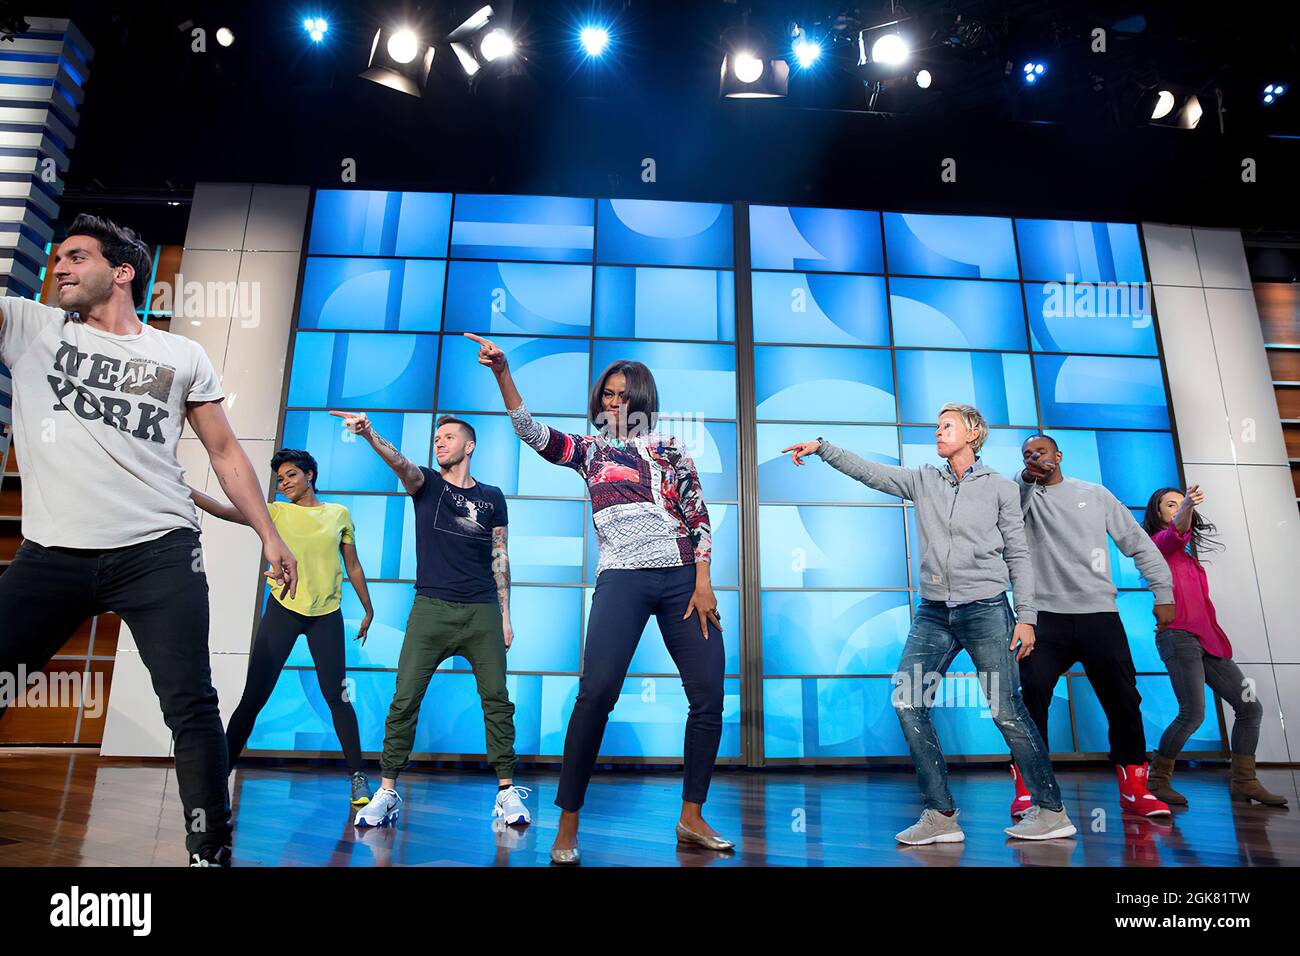 First Lady Michelle Obama rehearses with Ellen DeGeneres and the 'So You Think You Can Dance' dancers for a #GimmeFive 'Let's Move!' dance, prior to a taping of The Ellen DeGeneres Show in Burbank, Calif., March 12, 2015. (Official White House Photo by Amanda Lucidon) This official White House photograph is being made available only for publication by news organizations and/or for personal use printing by the subject(s) of the photograph. The photograph may not be manipulated in any way and may not be used in commercial or political materials, advertisements, emails, products, promotions that Stock Photo